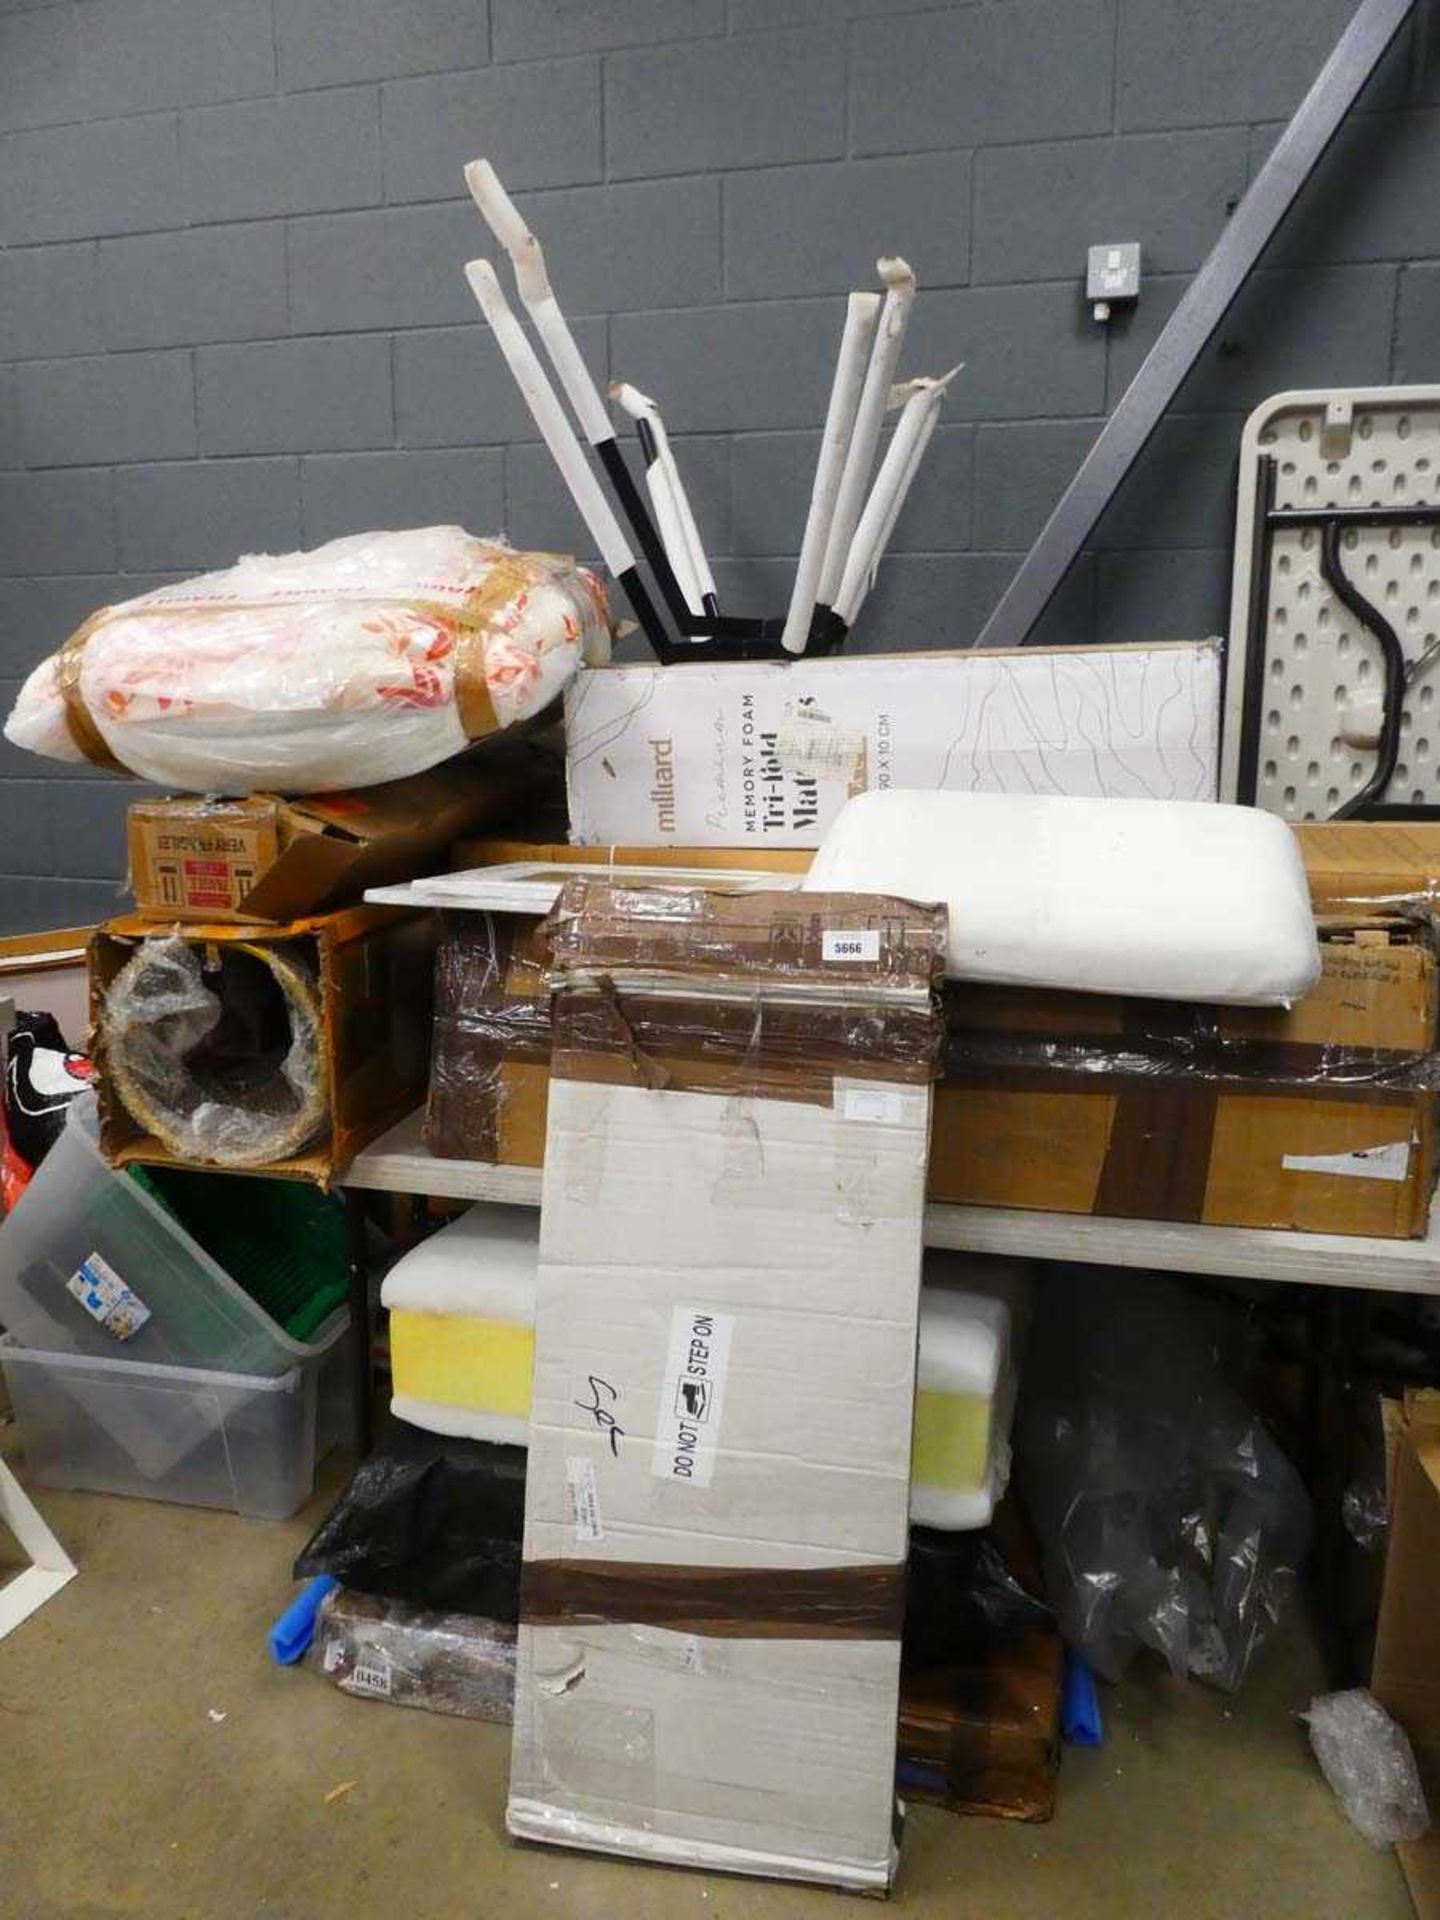 +VAT Large quantity of furniture parts, prints, cushions, plus a wicker seat, as found